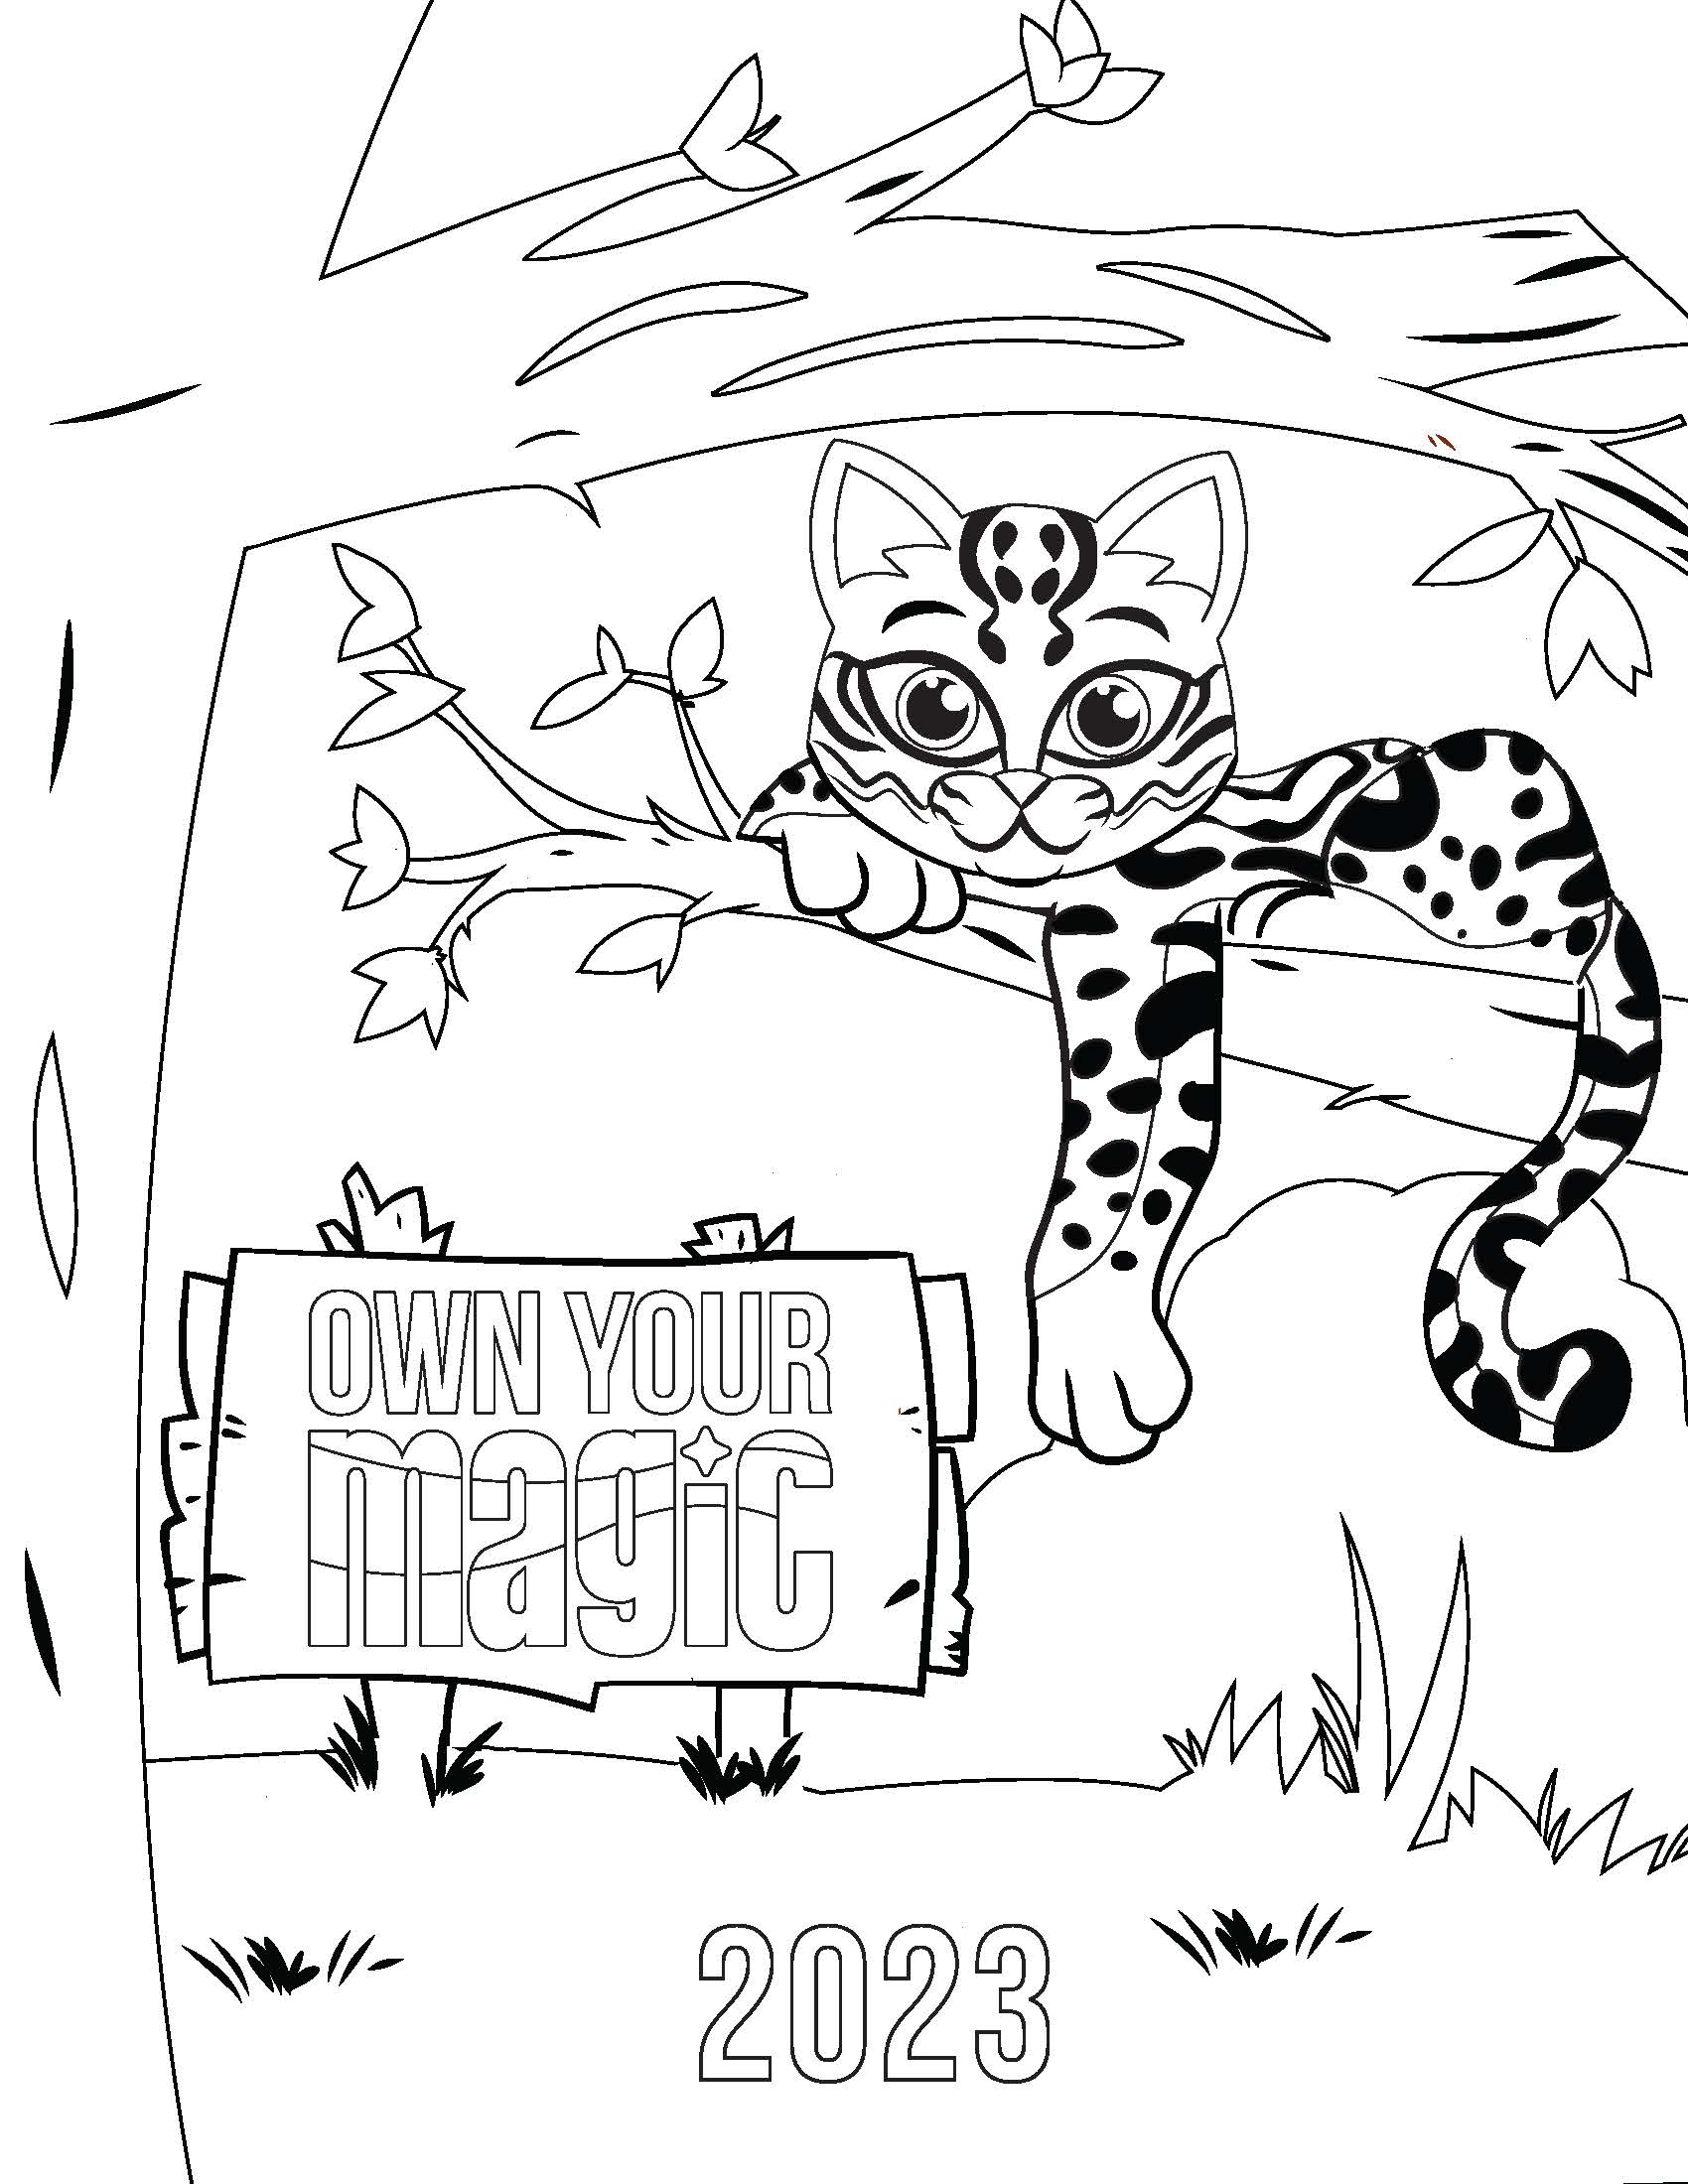 MagNut Coloring Page 2